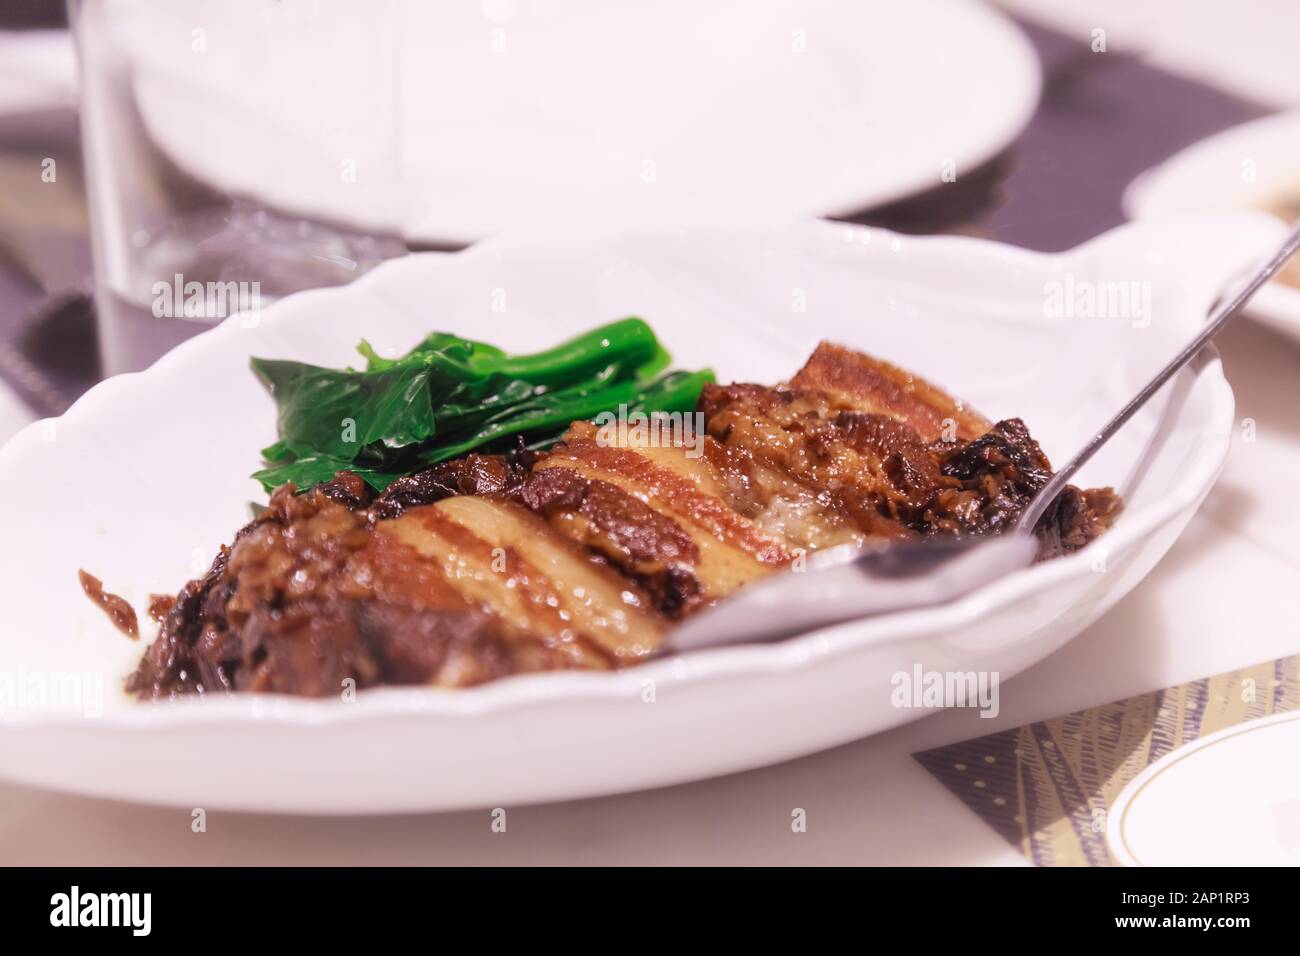 Traditional Thai Chinese Food Dish, Delicious Steamed Belly Pork served with Santow Mustard Cabbage. Asian Oriental Cuisine  Recipe, Delicacy, Gourmet Stock Photo